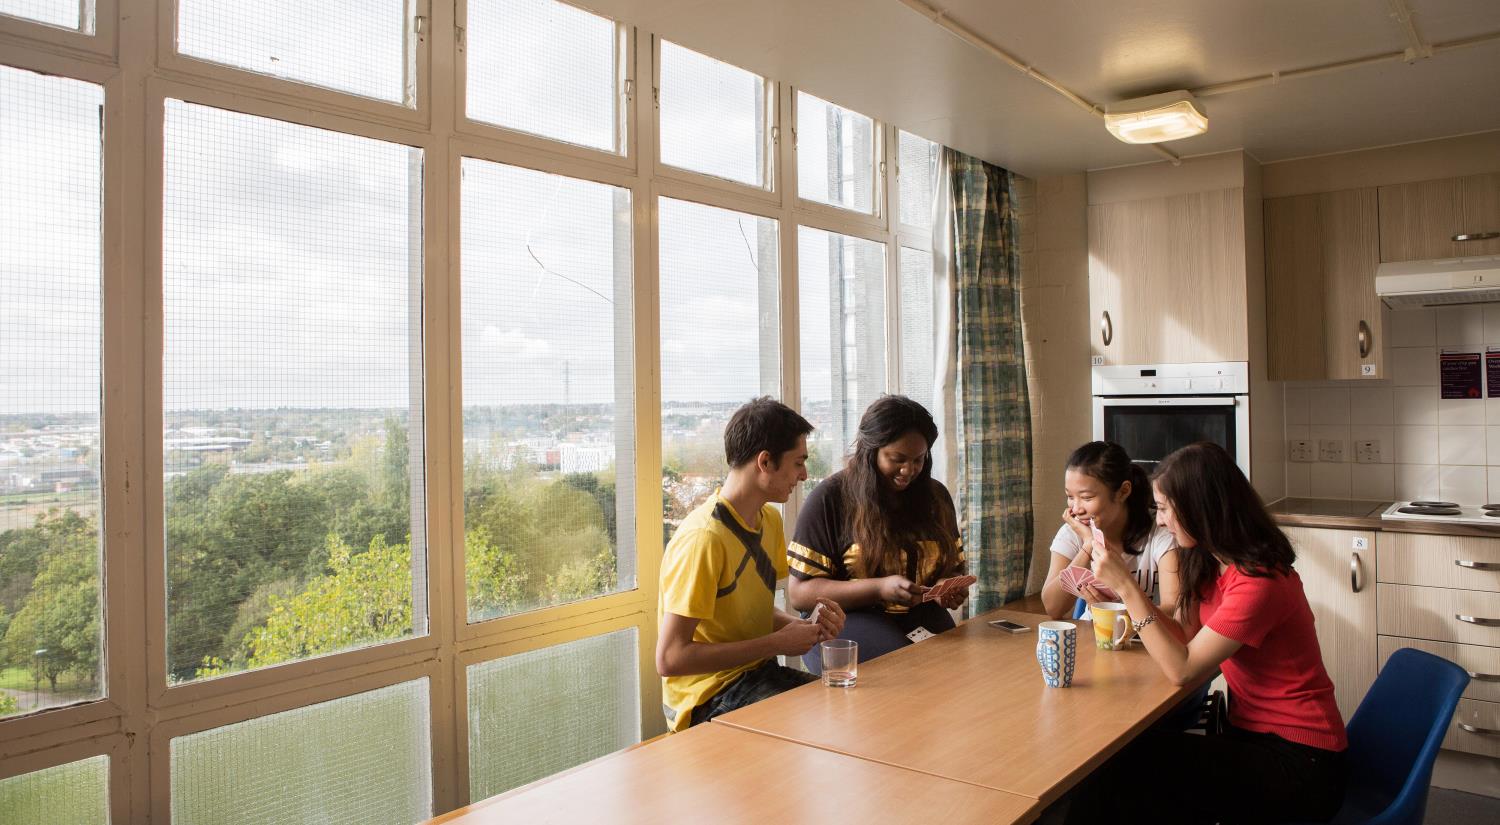 Enjoy amazing views of campus from the Towers